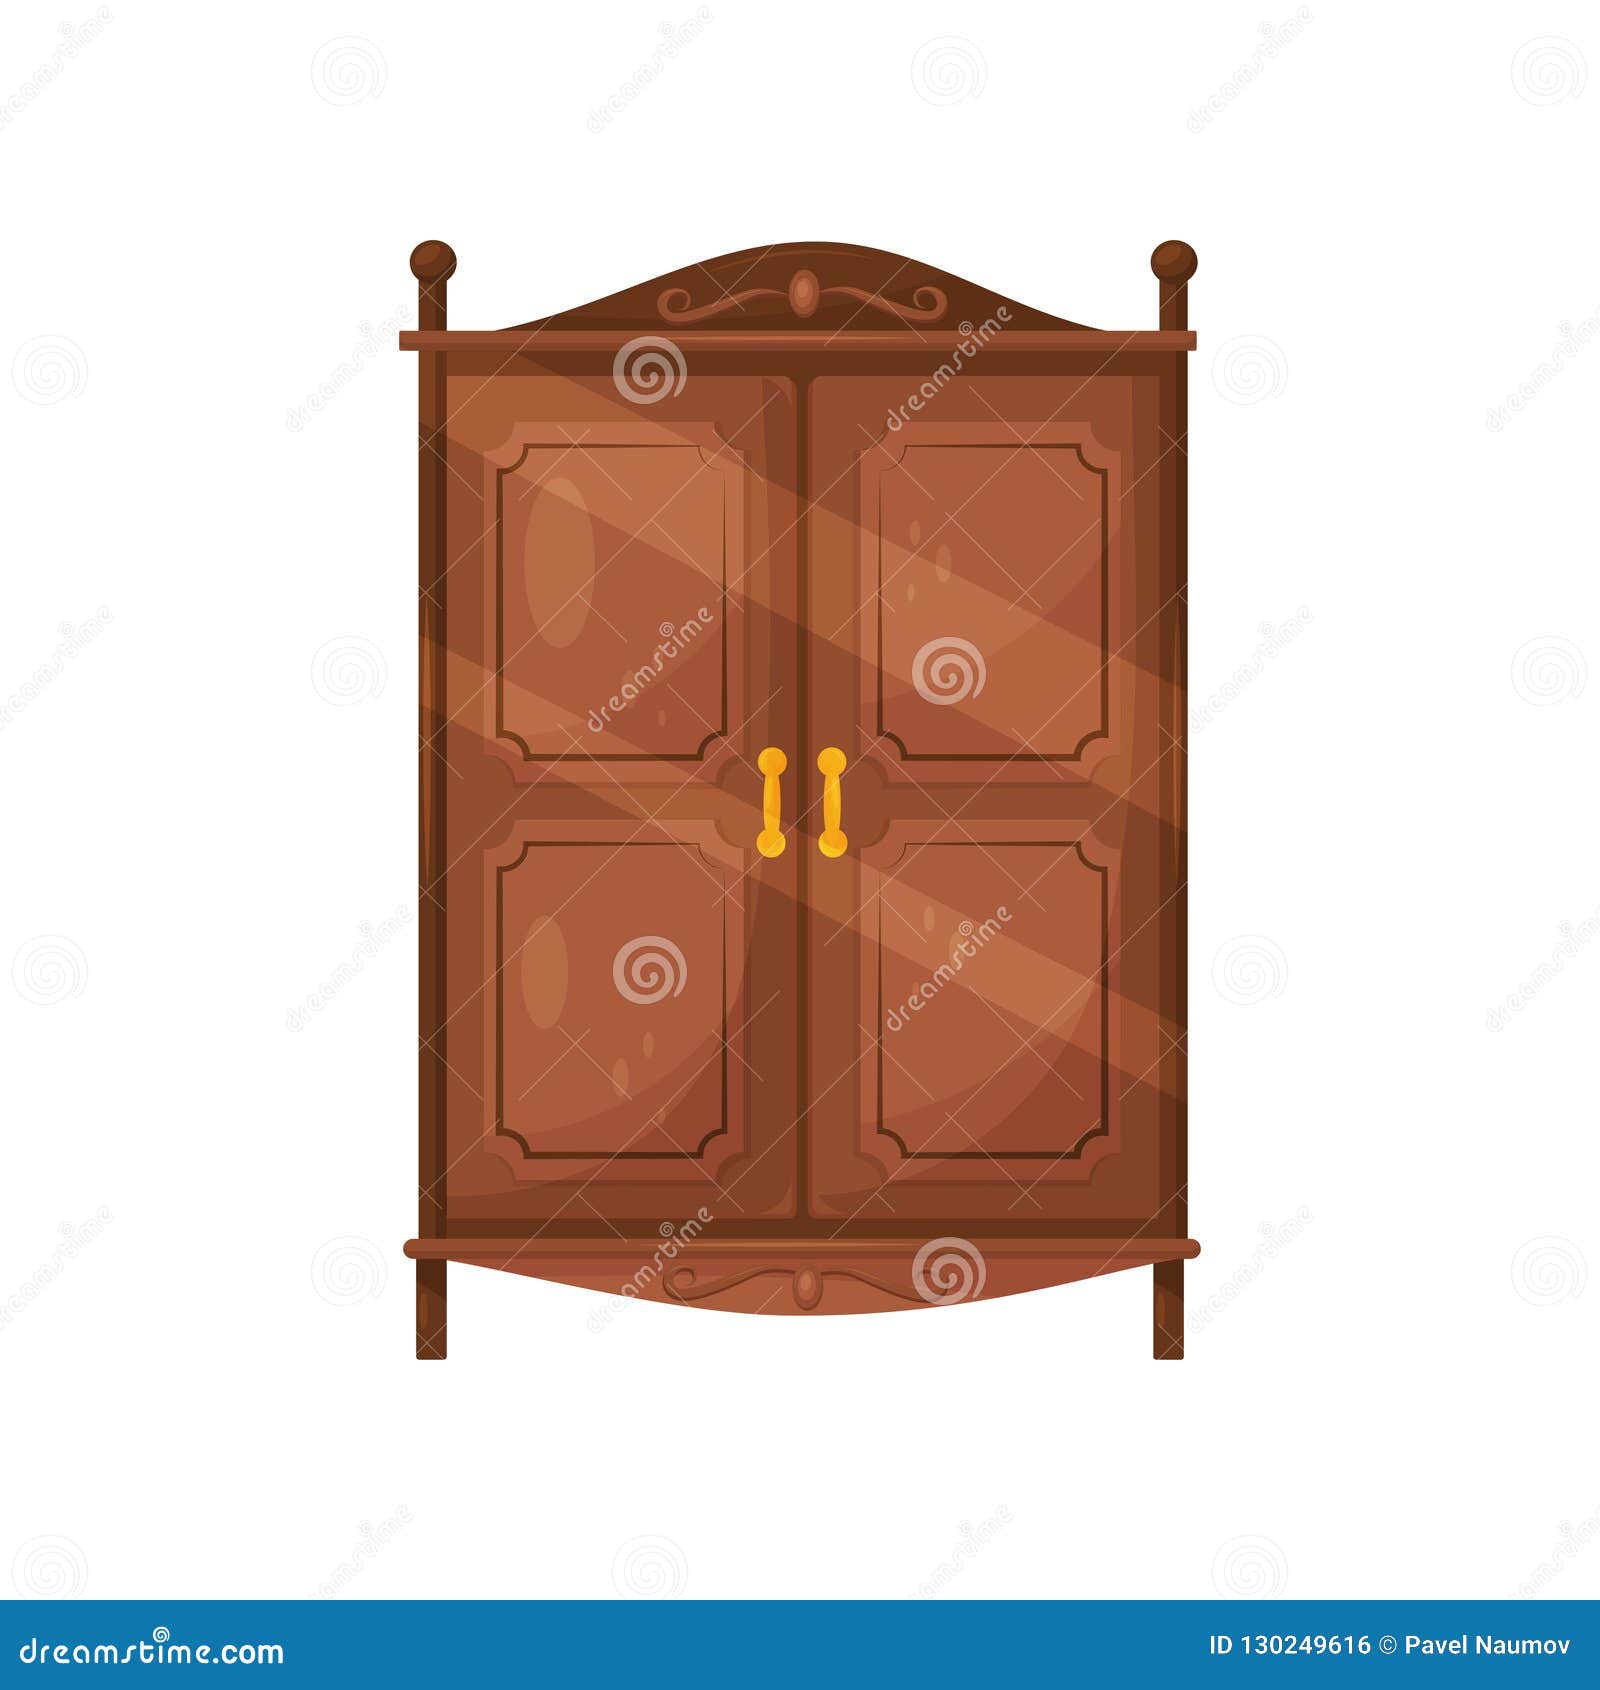 Cupboard Cartoons, Illustrations & Vector Stock Images - 37283 Pictures ...